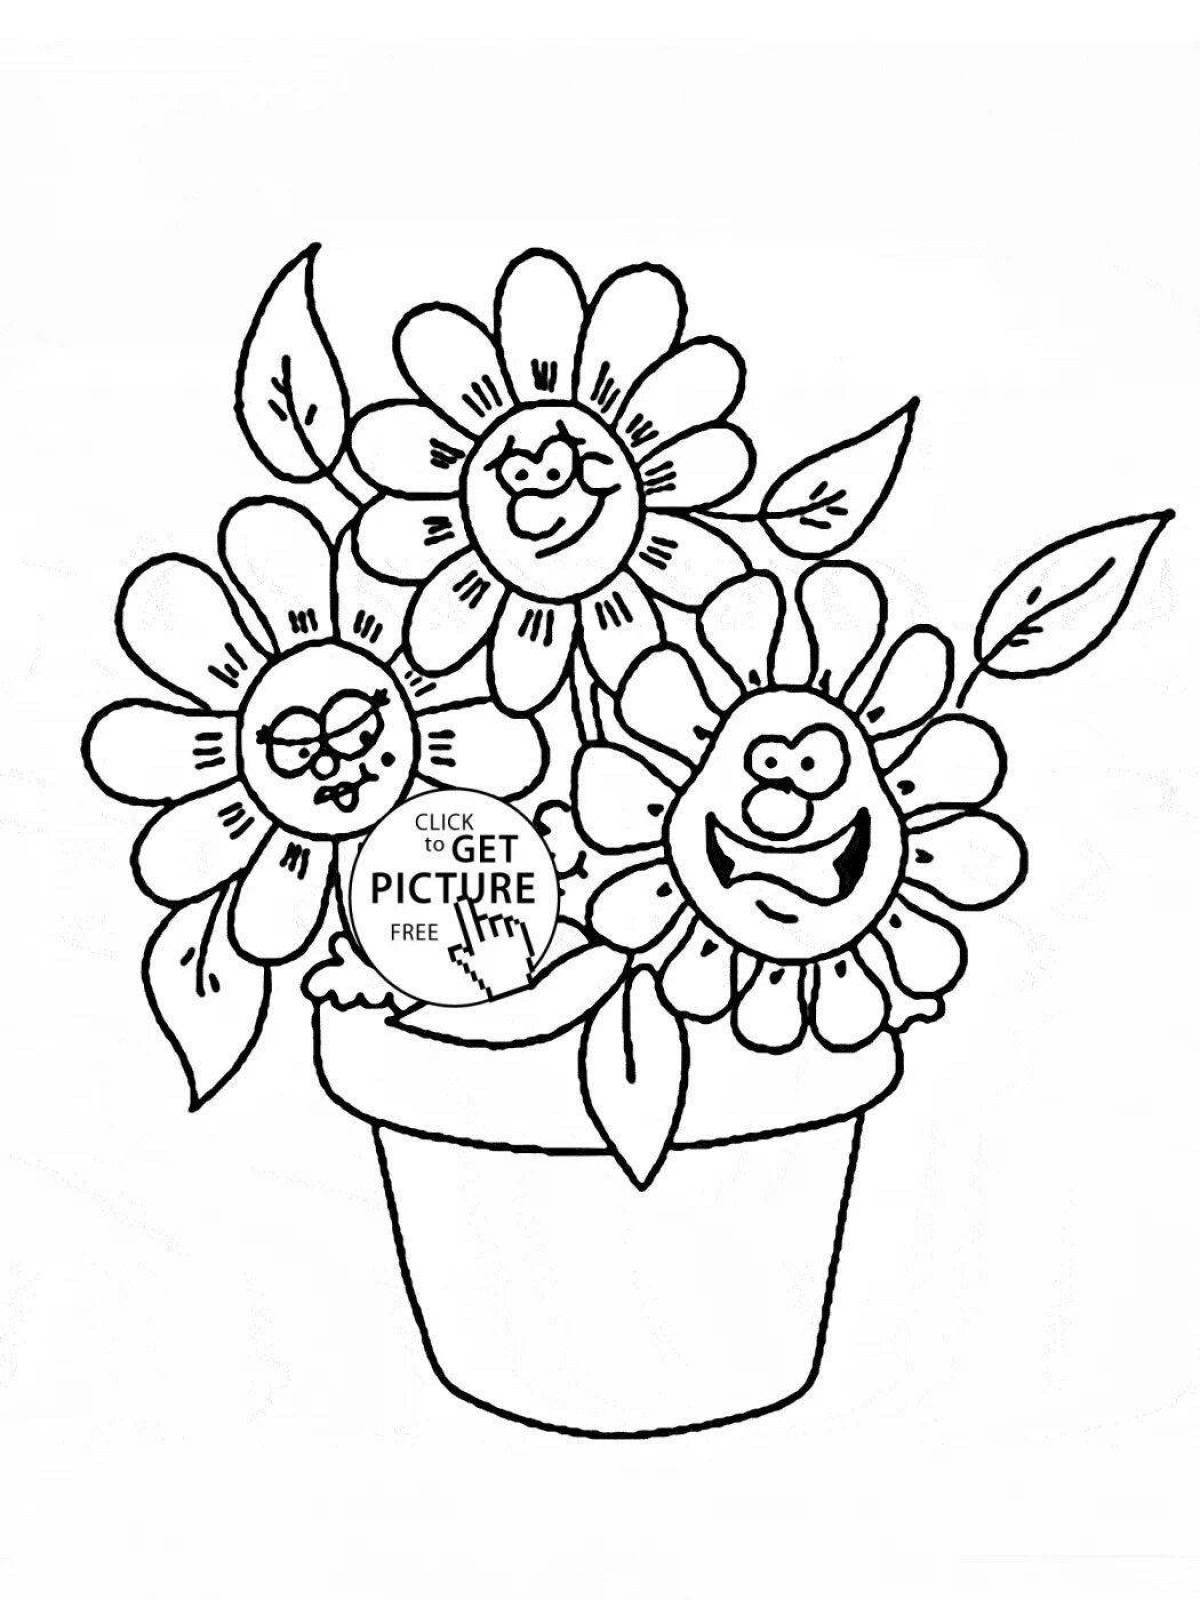 Awesome flower pot coloring page for kids